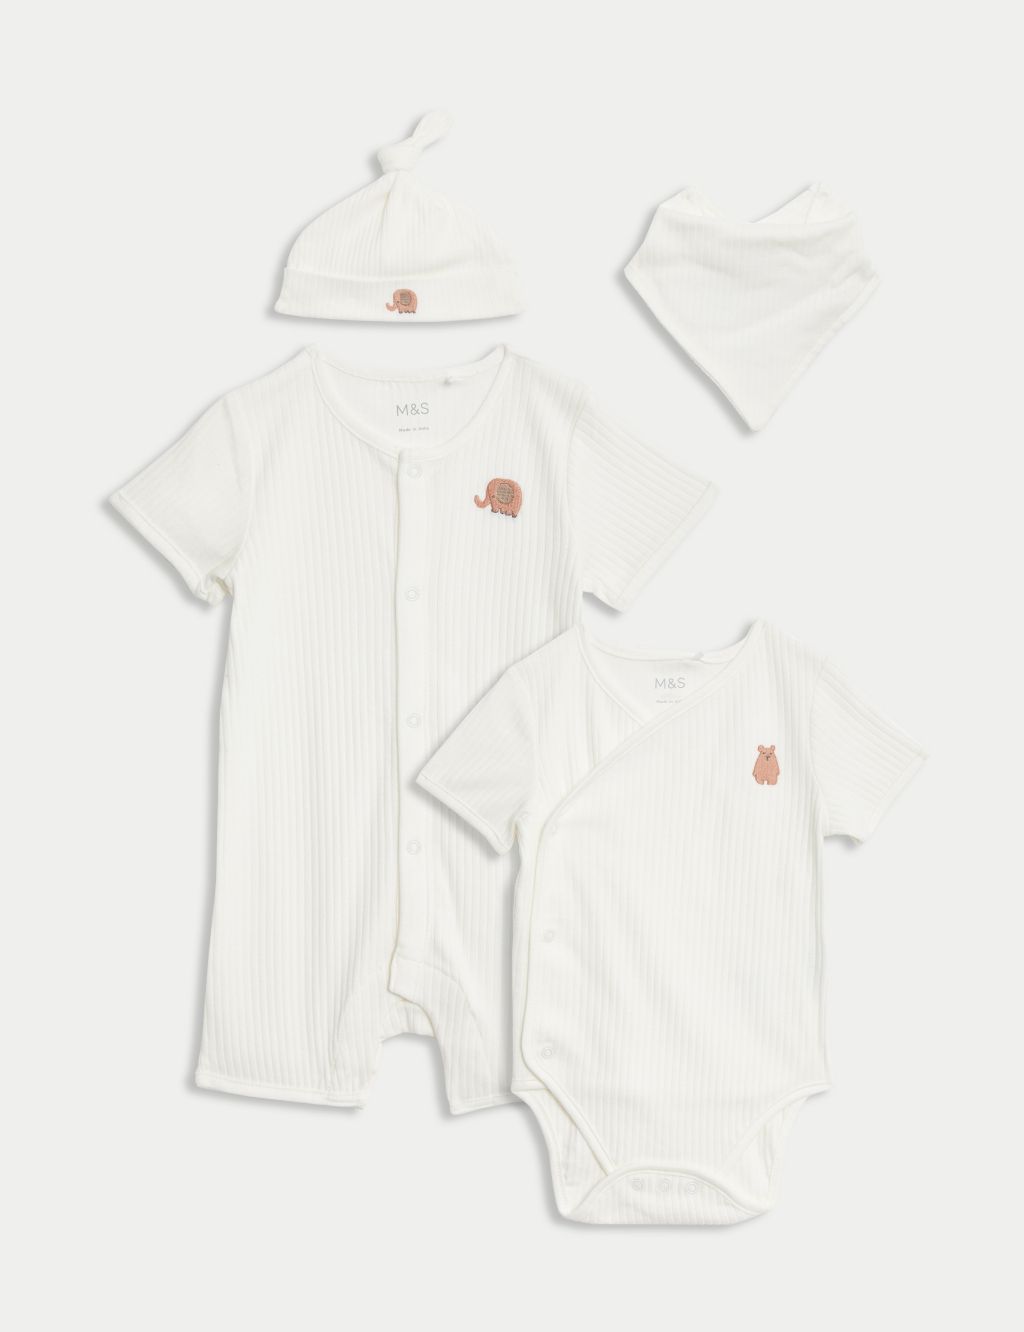 4pc Pure Cotton Bear & Elephant Outfit (7lbs-1 Yrs)